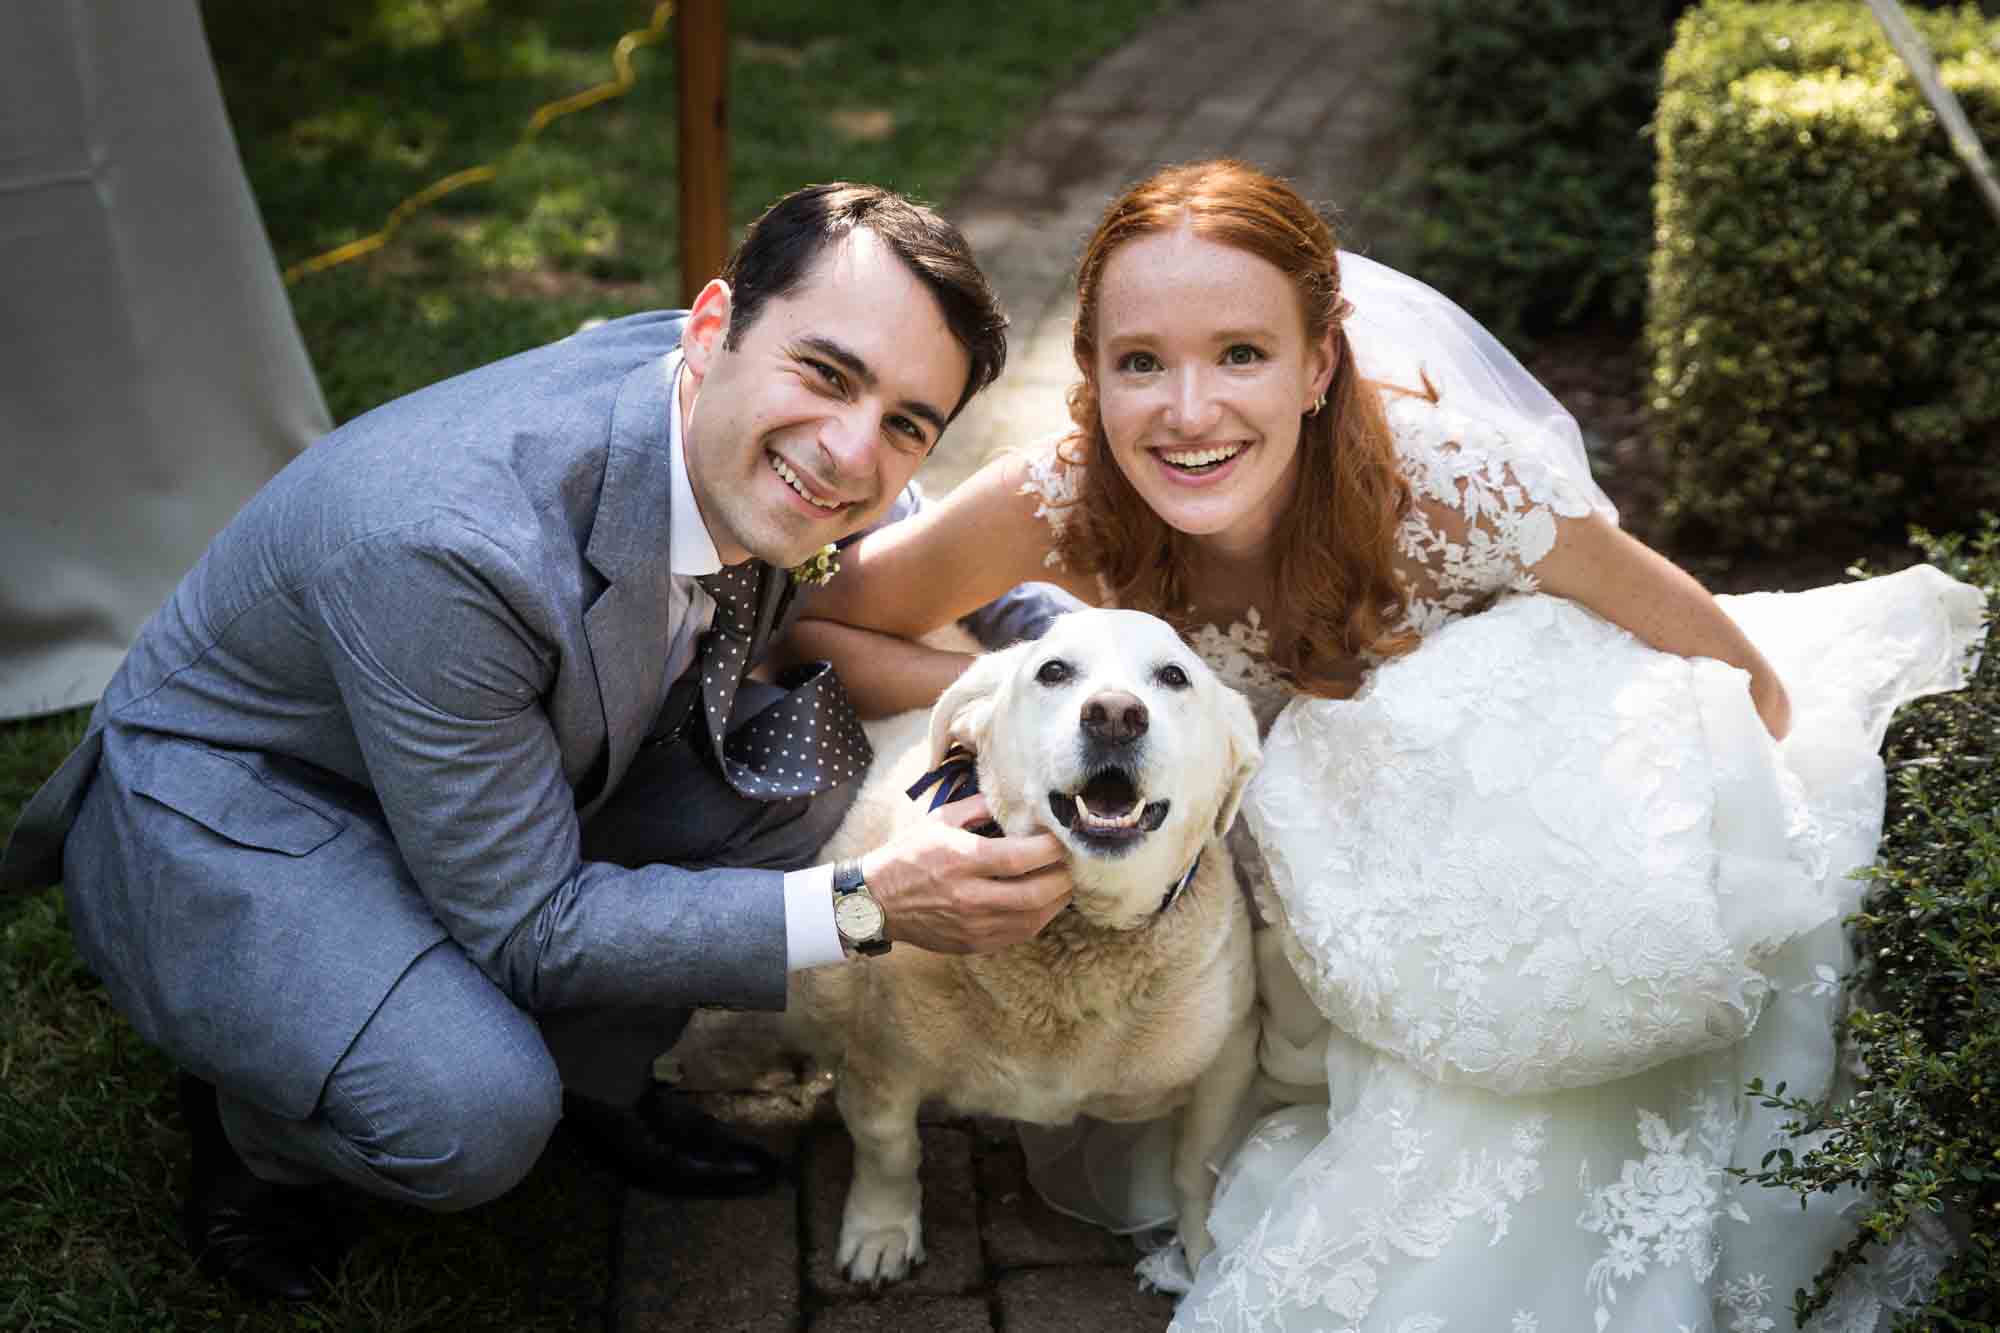 Bride and groom bending down over white dog for an article on backyard wedding tips